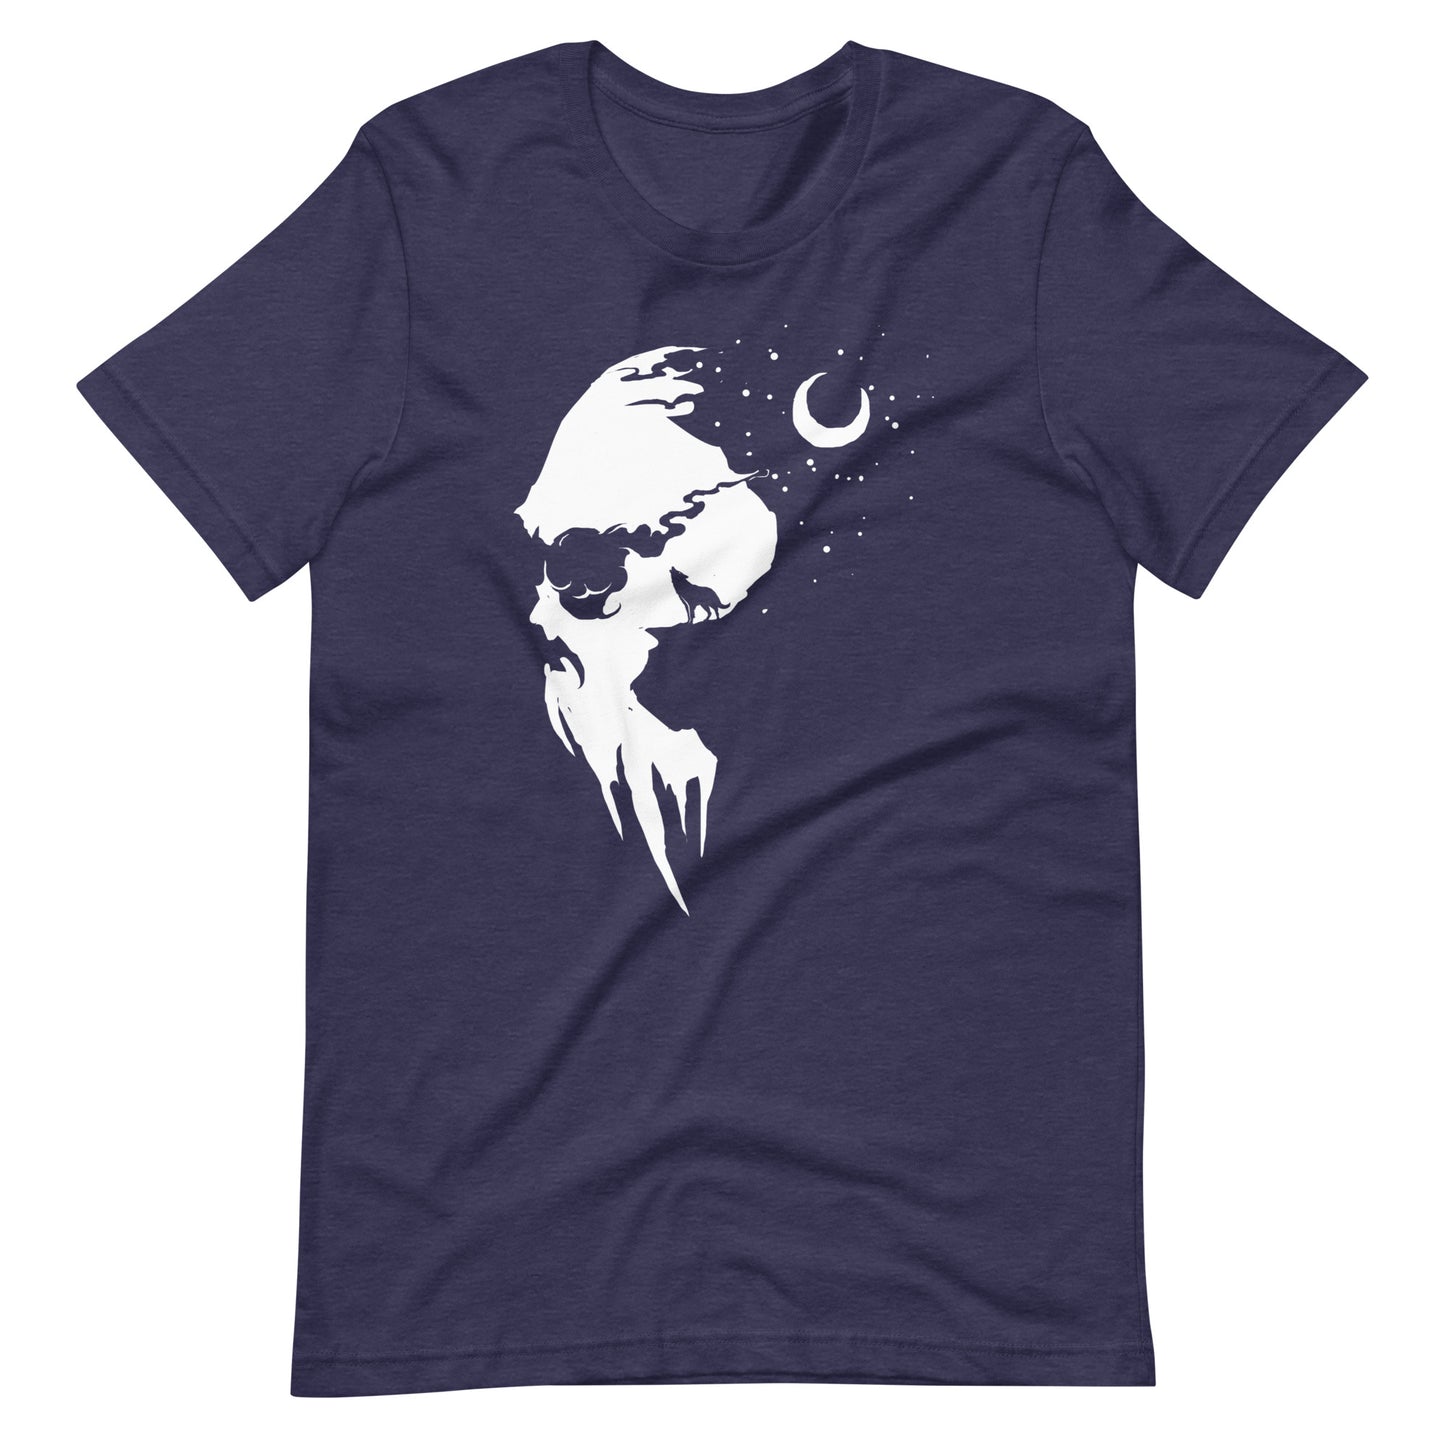 The Night Has Come - Men's t-shirt - Heather Midnight Navy Front